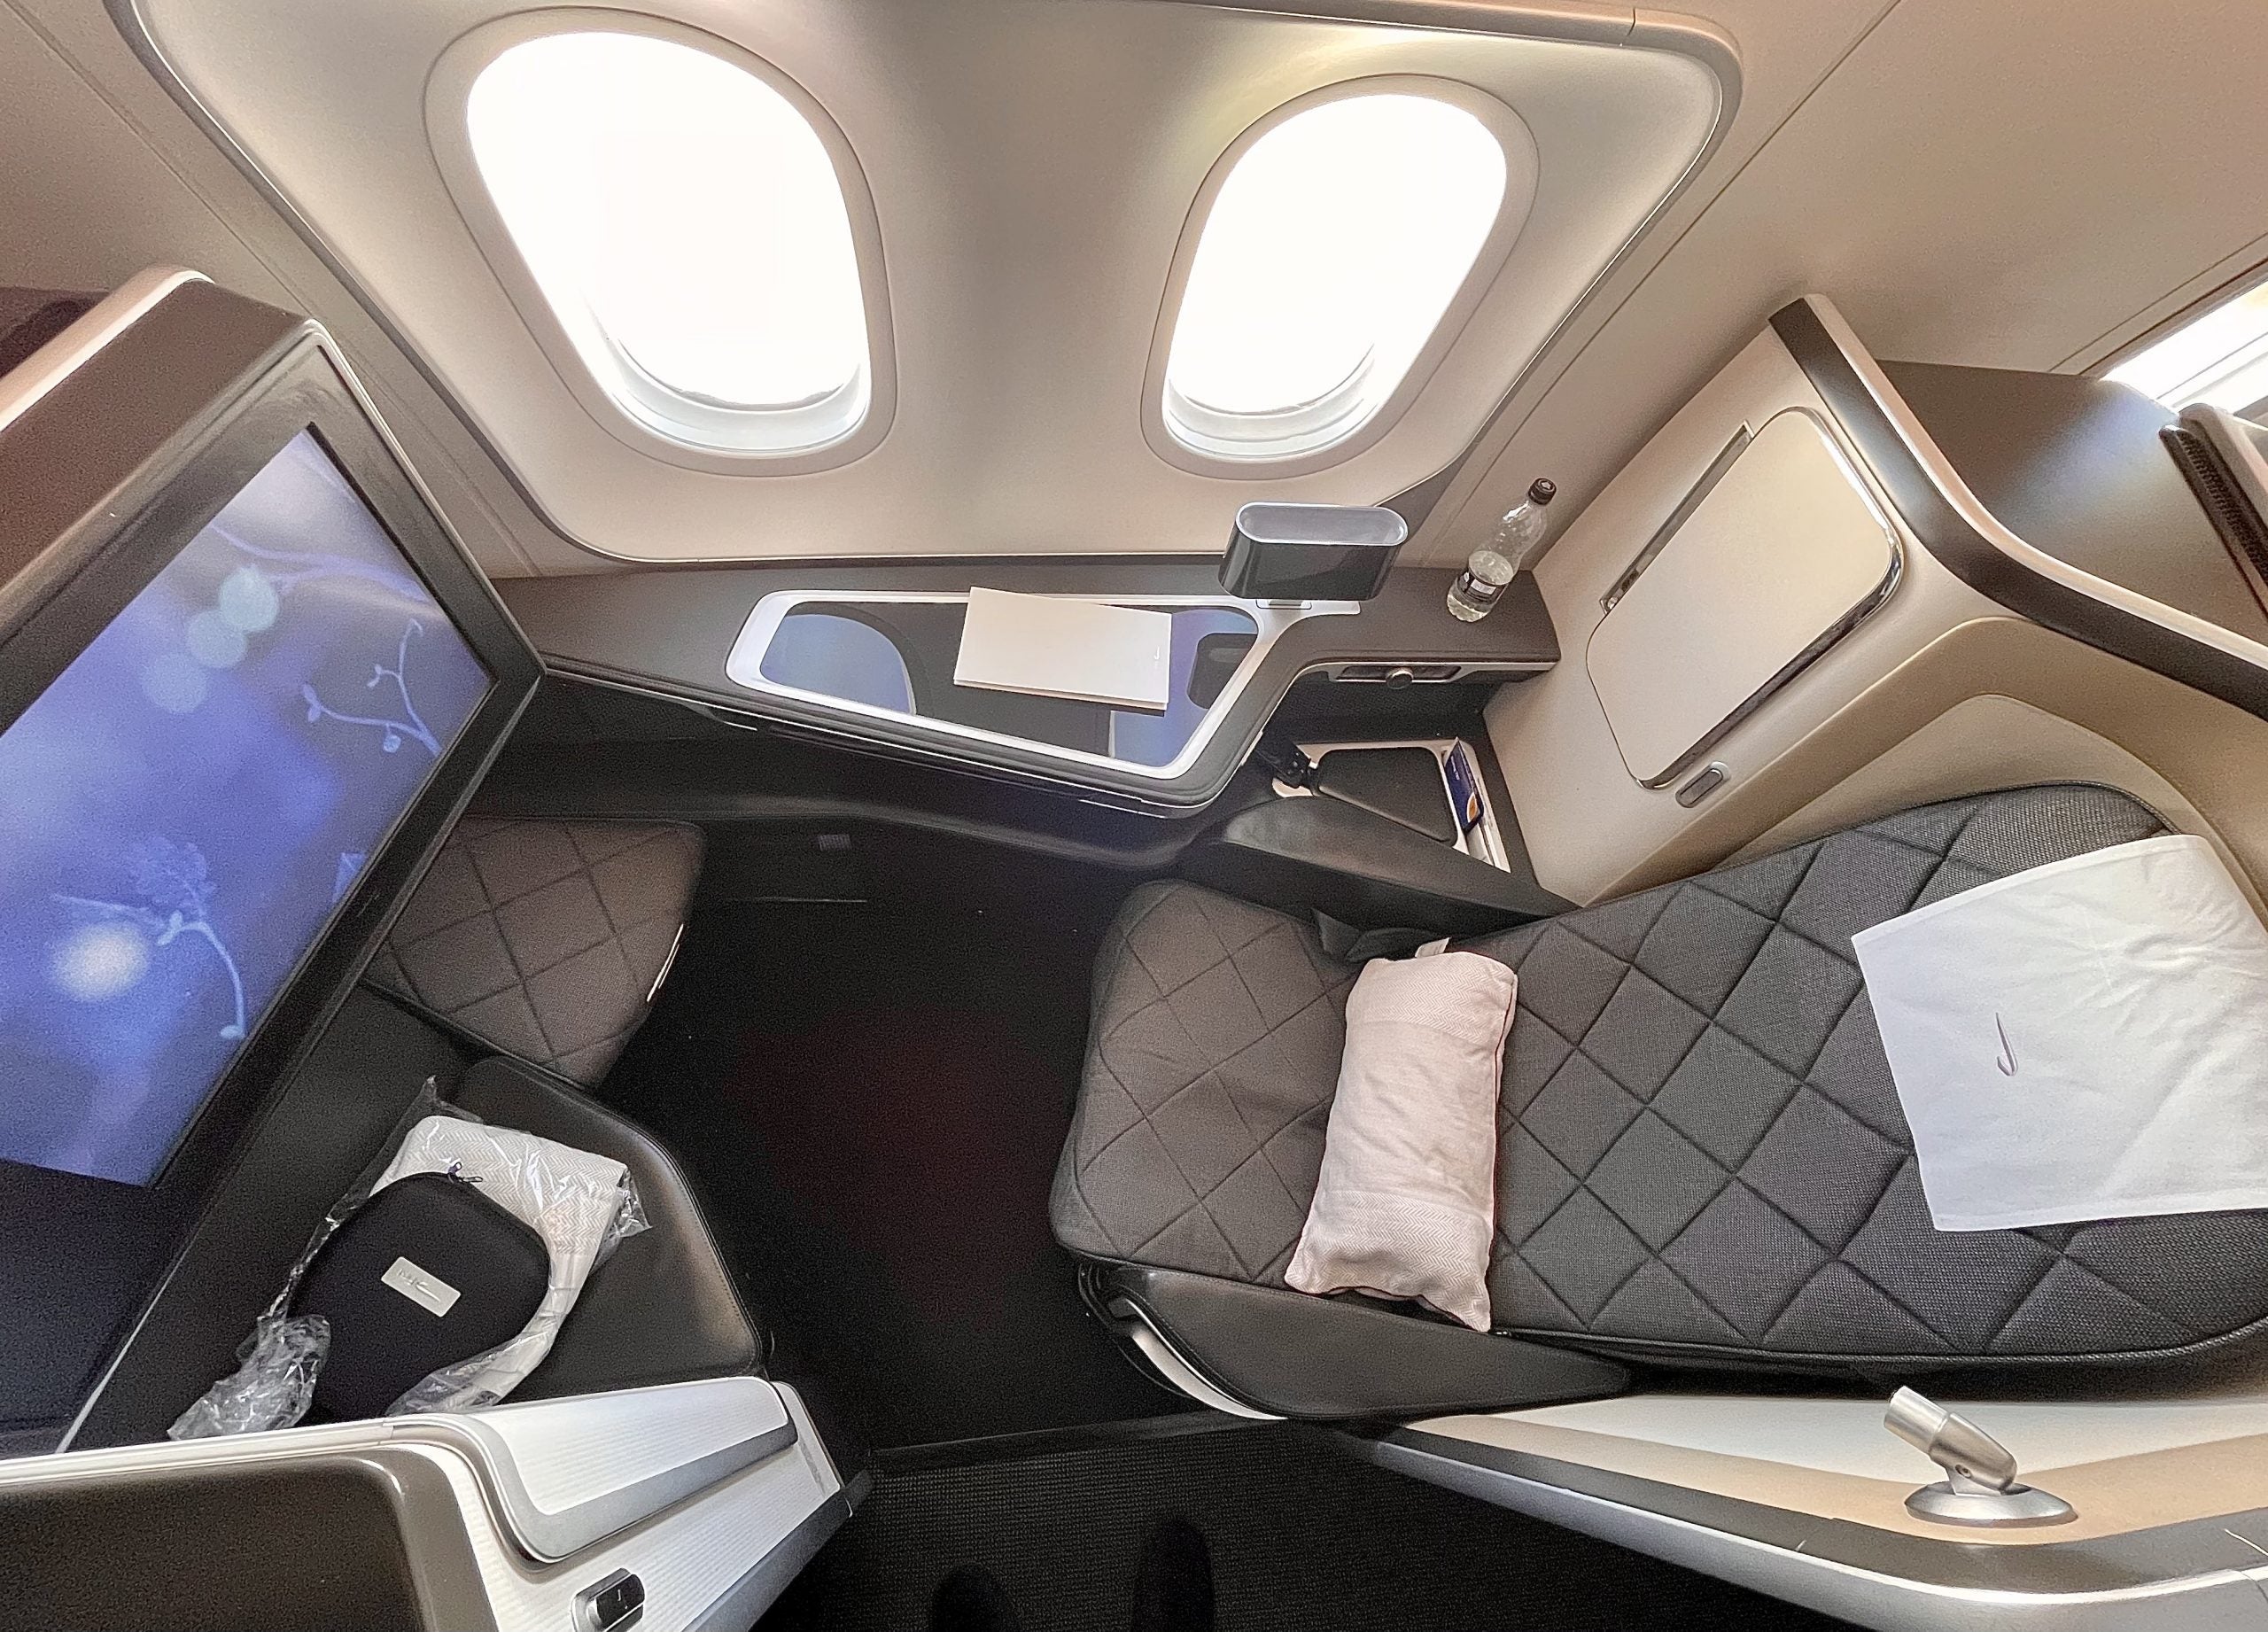 British Airways 787 First Class. Photo by Nicky Kelvin / The Points Guy